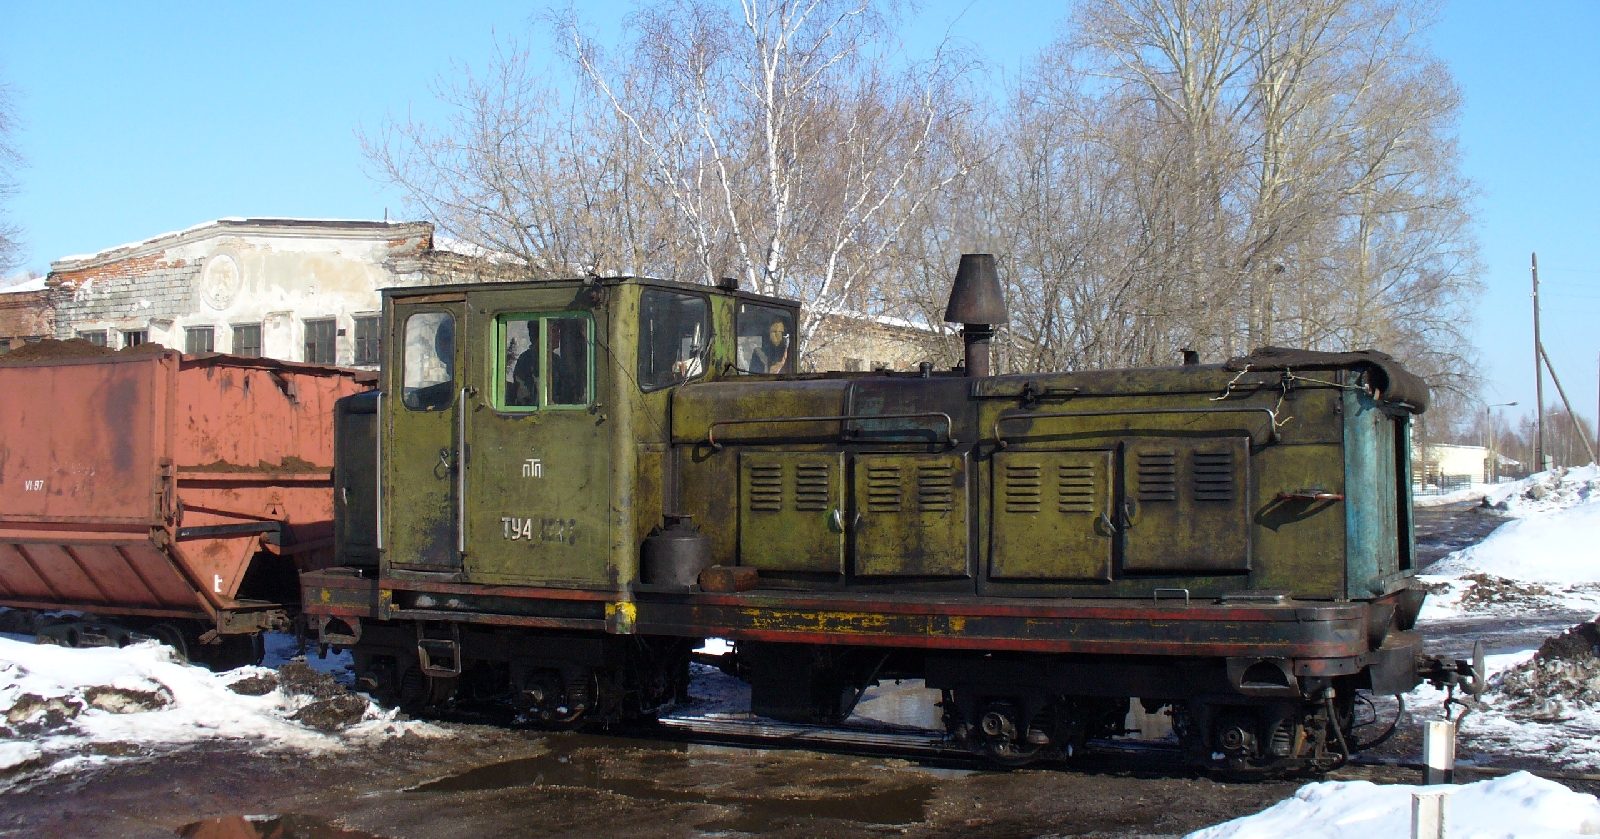 ТУ4-2727 in March 2006 on the Shatura peat railway